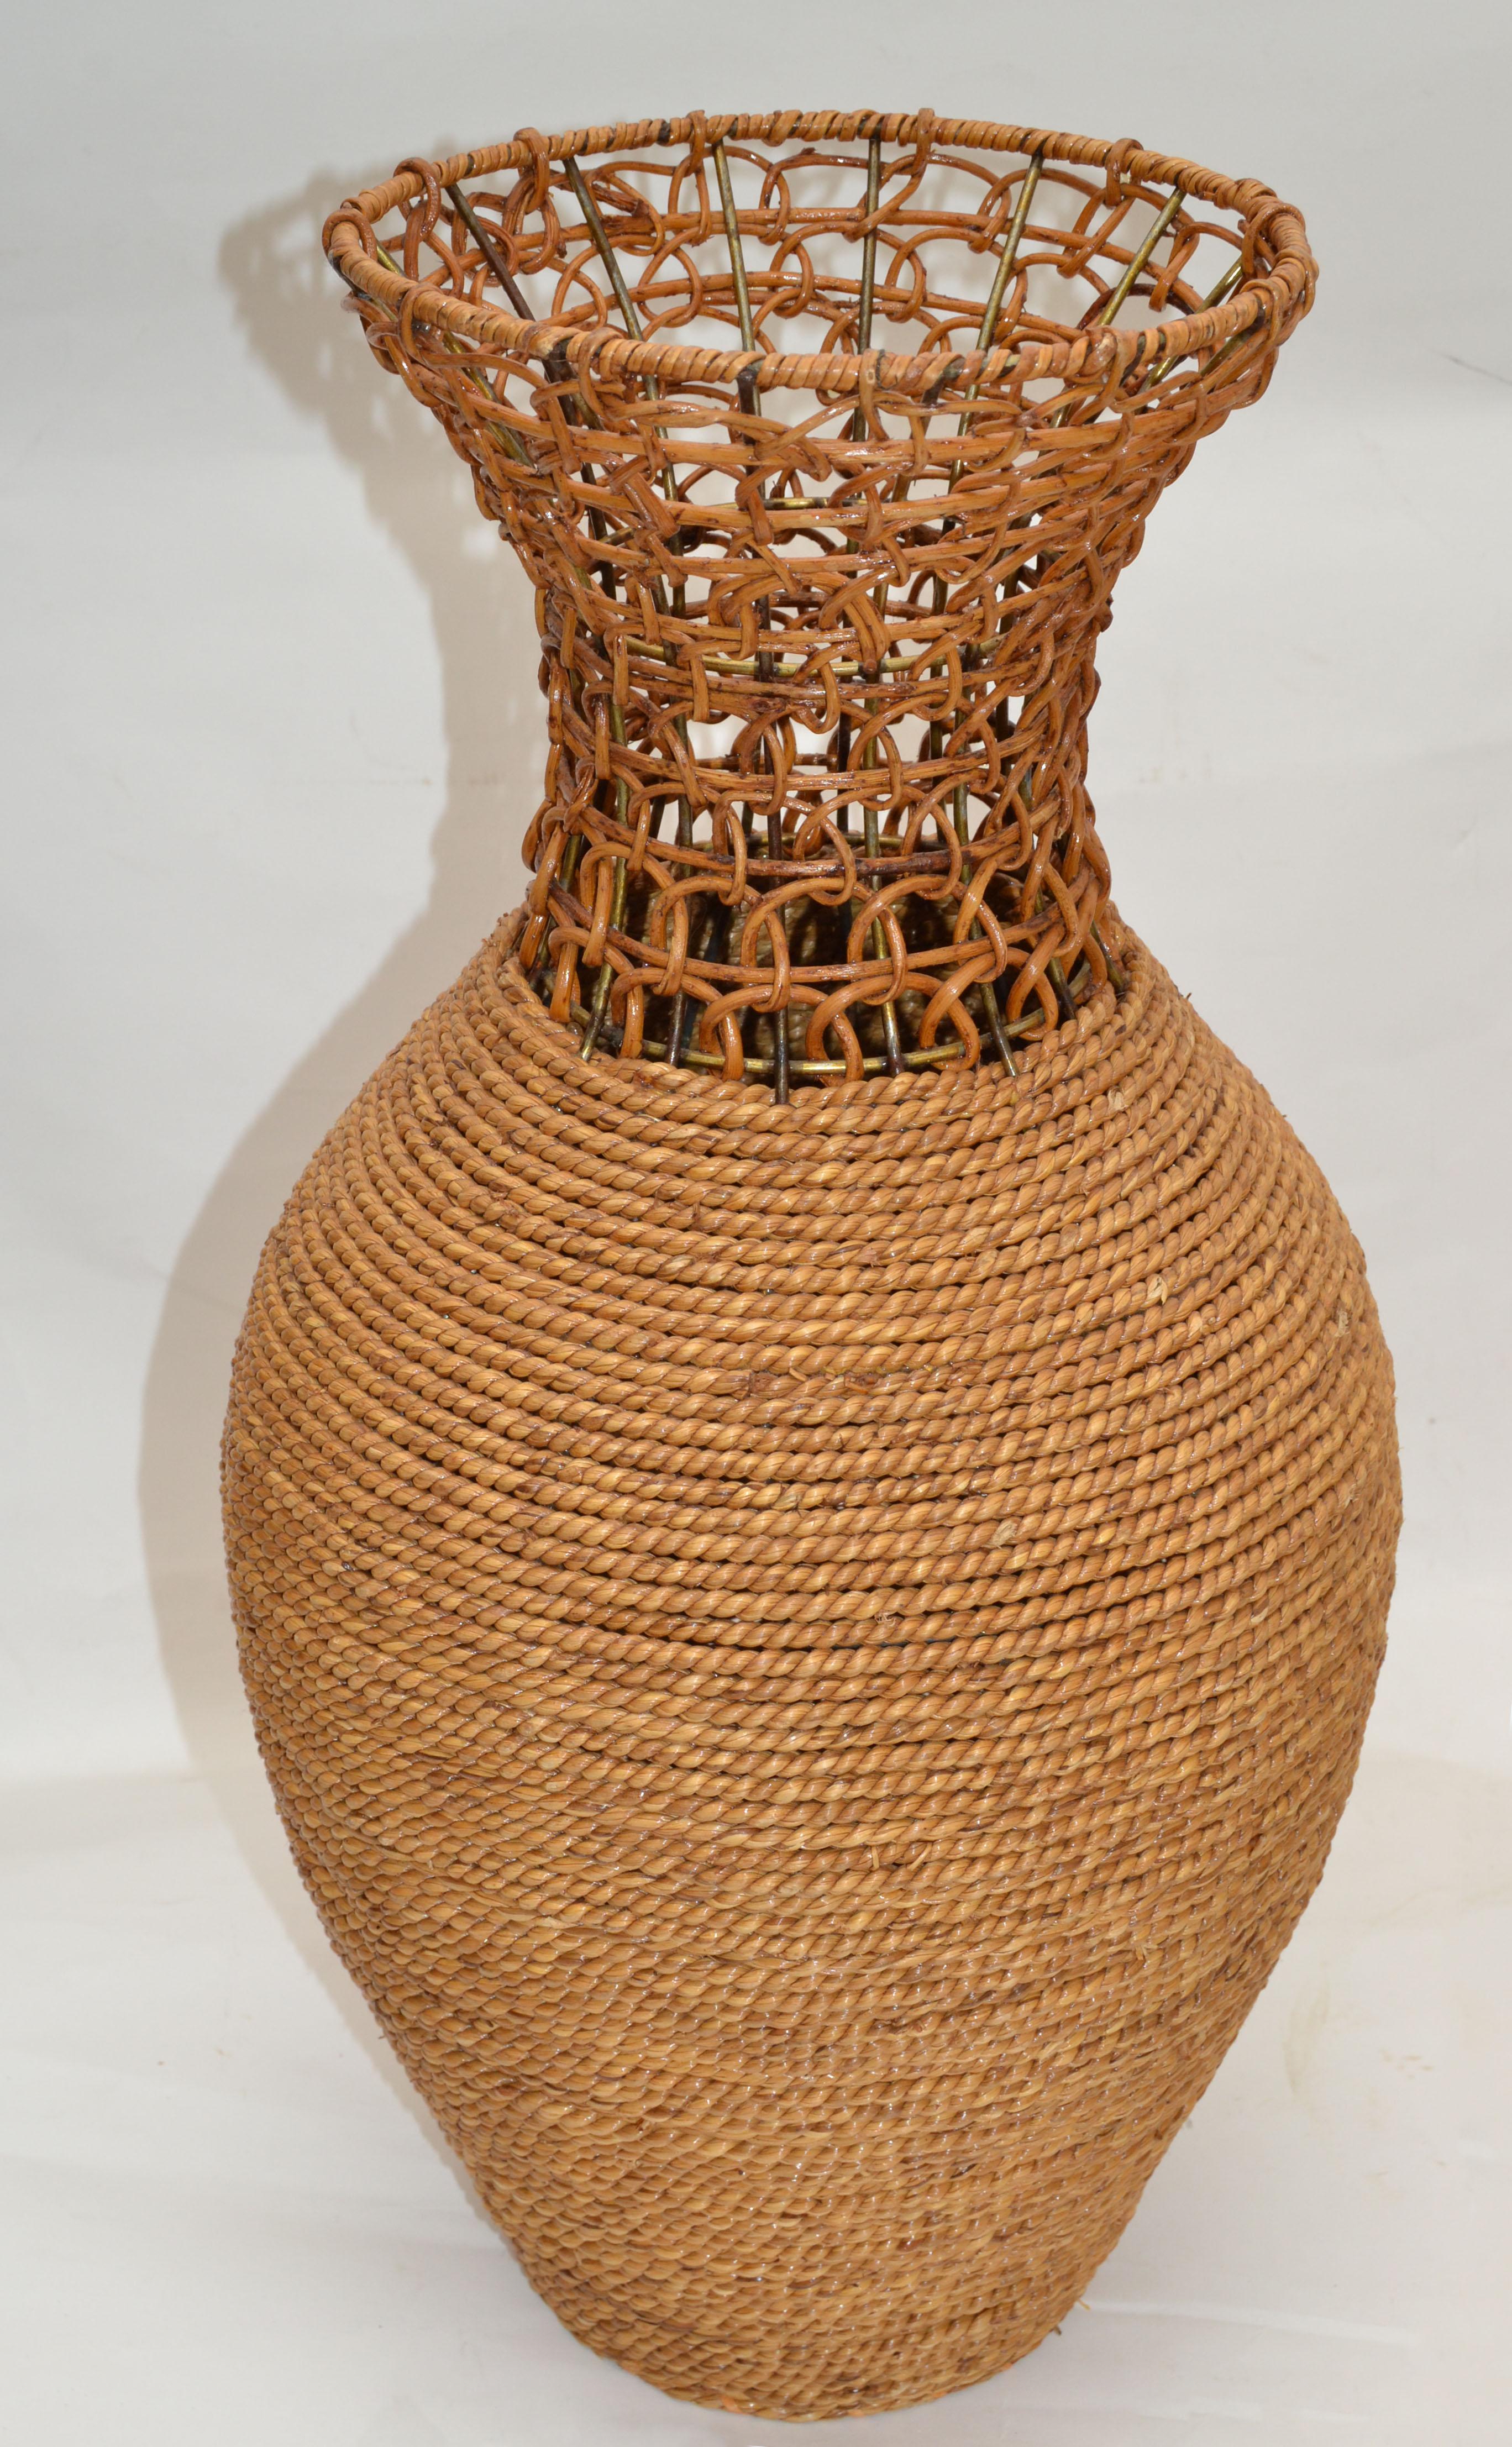 Handwoven American rope and reed Bohemian vase.
Mid-Century Modern from the 1970.
No markings.